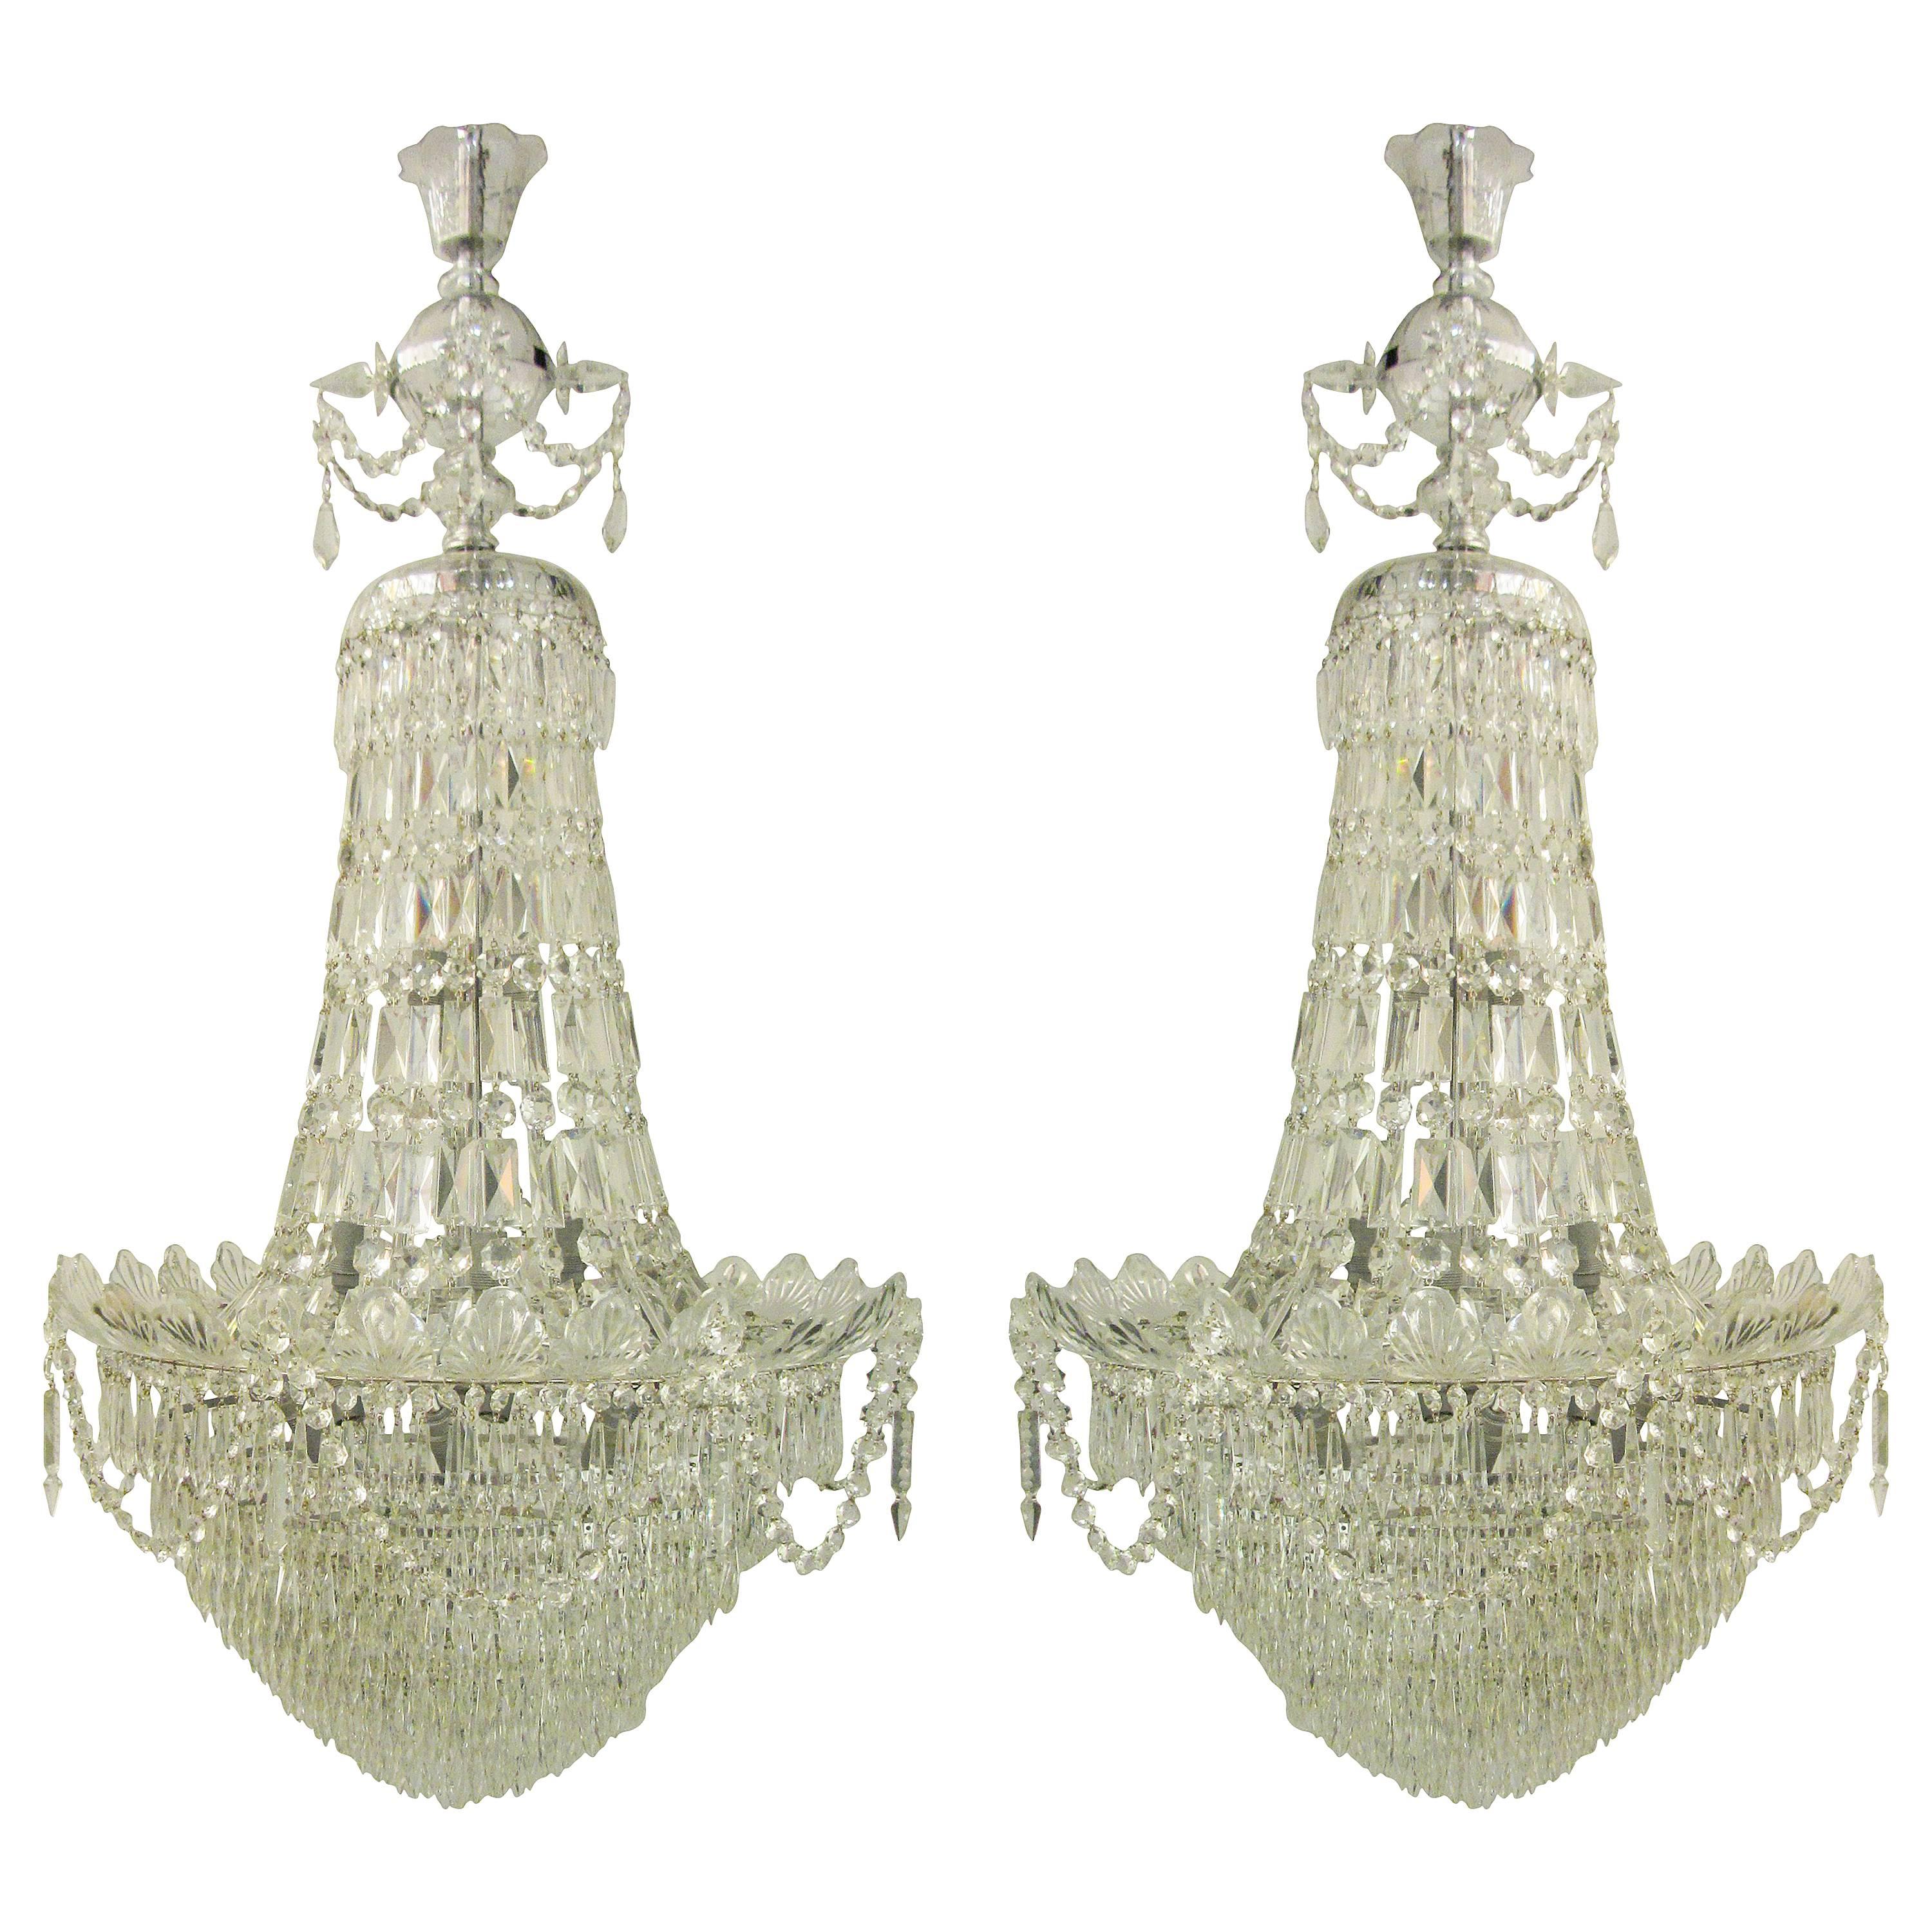 Pair of French Waterfall Chandeliers For Sale